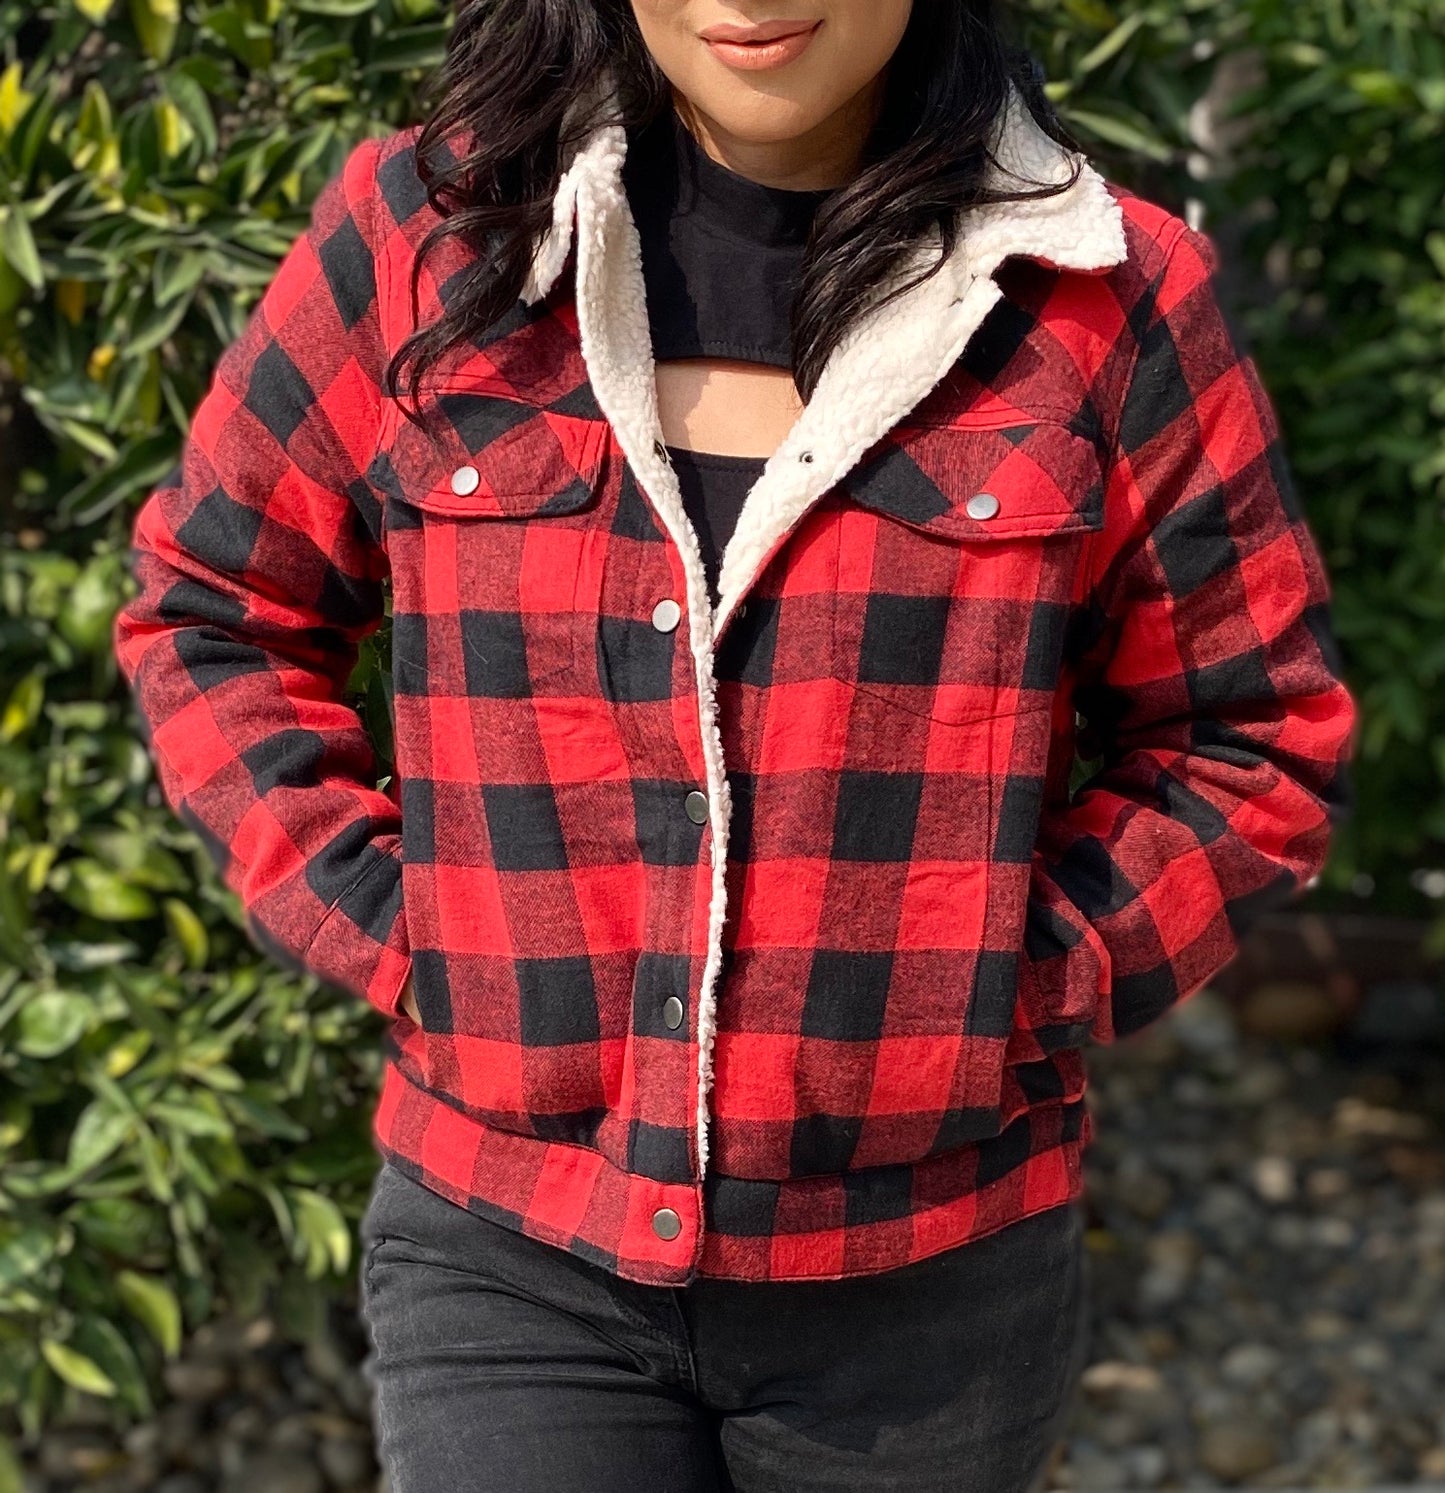 Tahoe Cabin Fever Outdoor Plaid is Print Winter Jacket (red)